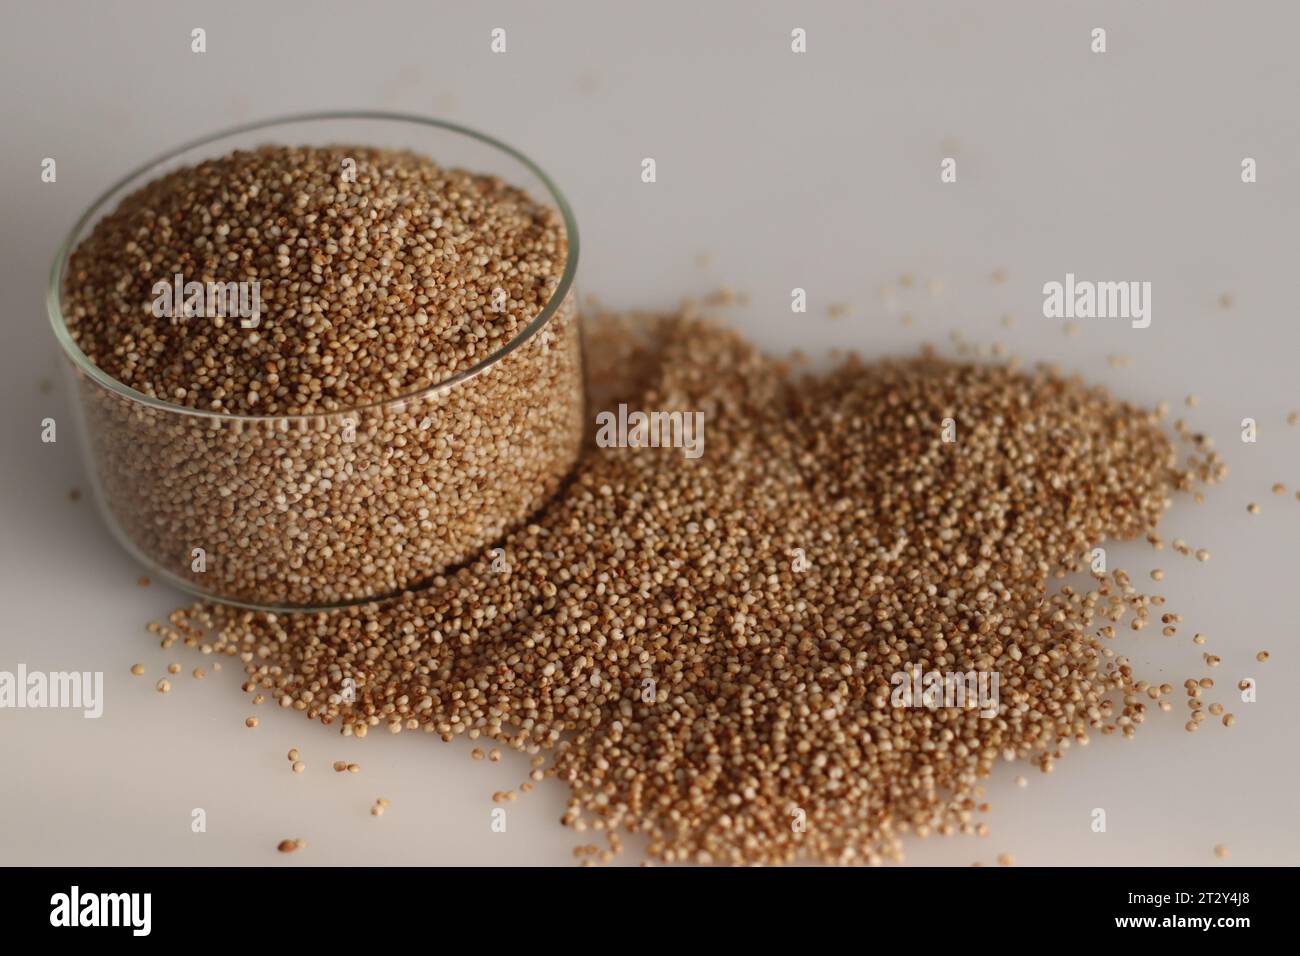 Closeup of kodo millet, a healthy grain, in a glass bowl filled to the brim, highlighting their wholesome and nutritious appeal. Perfect for food and Stock Photo